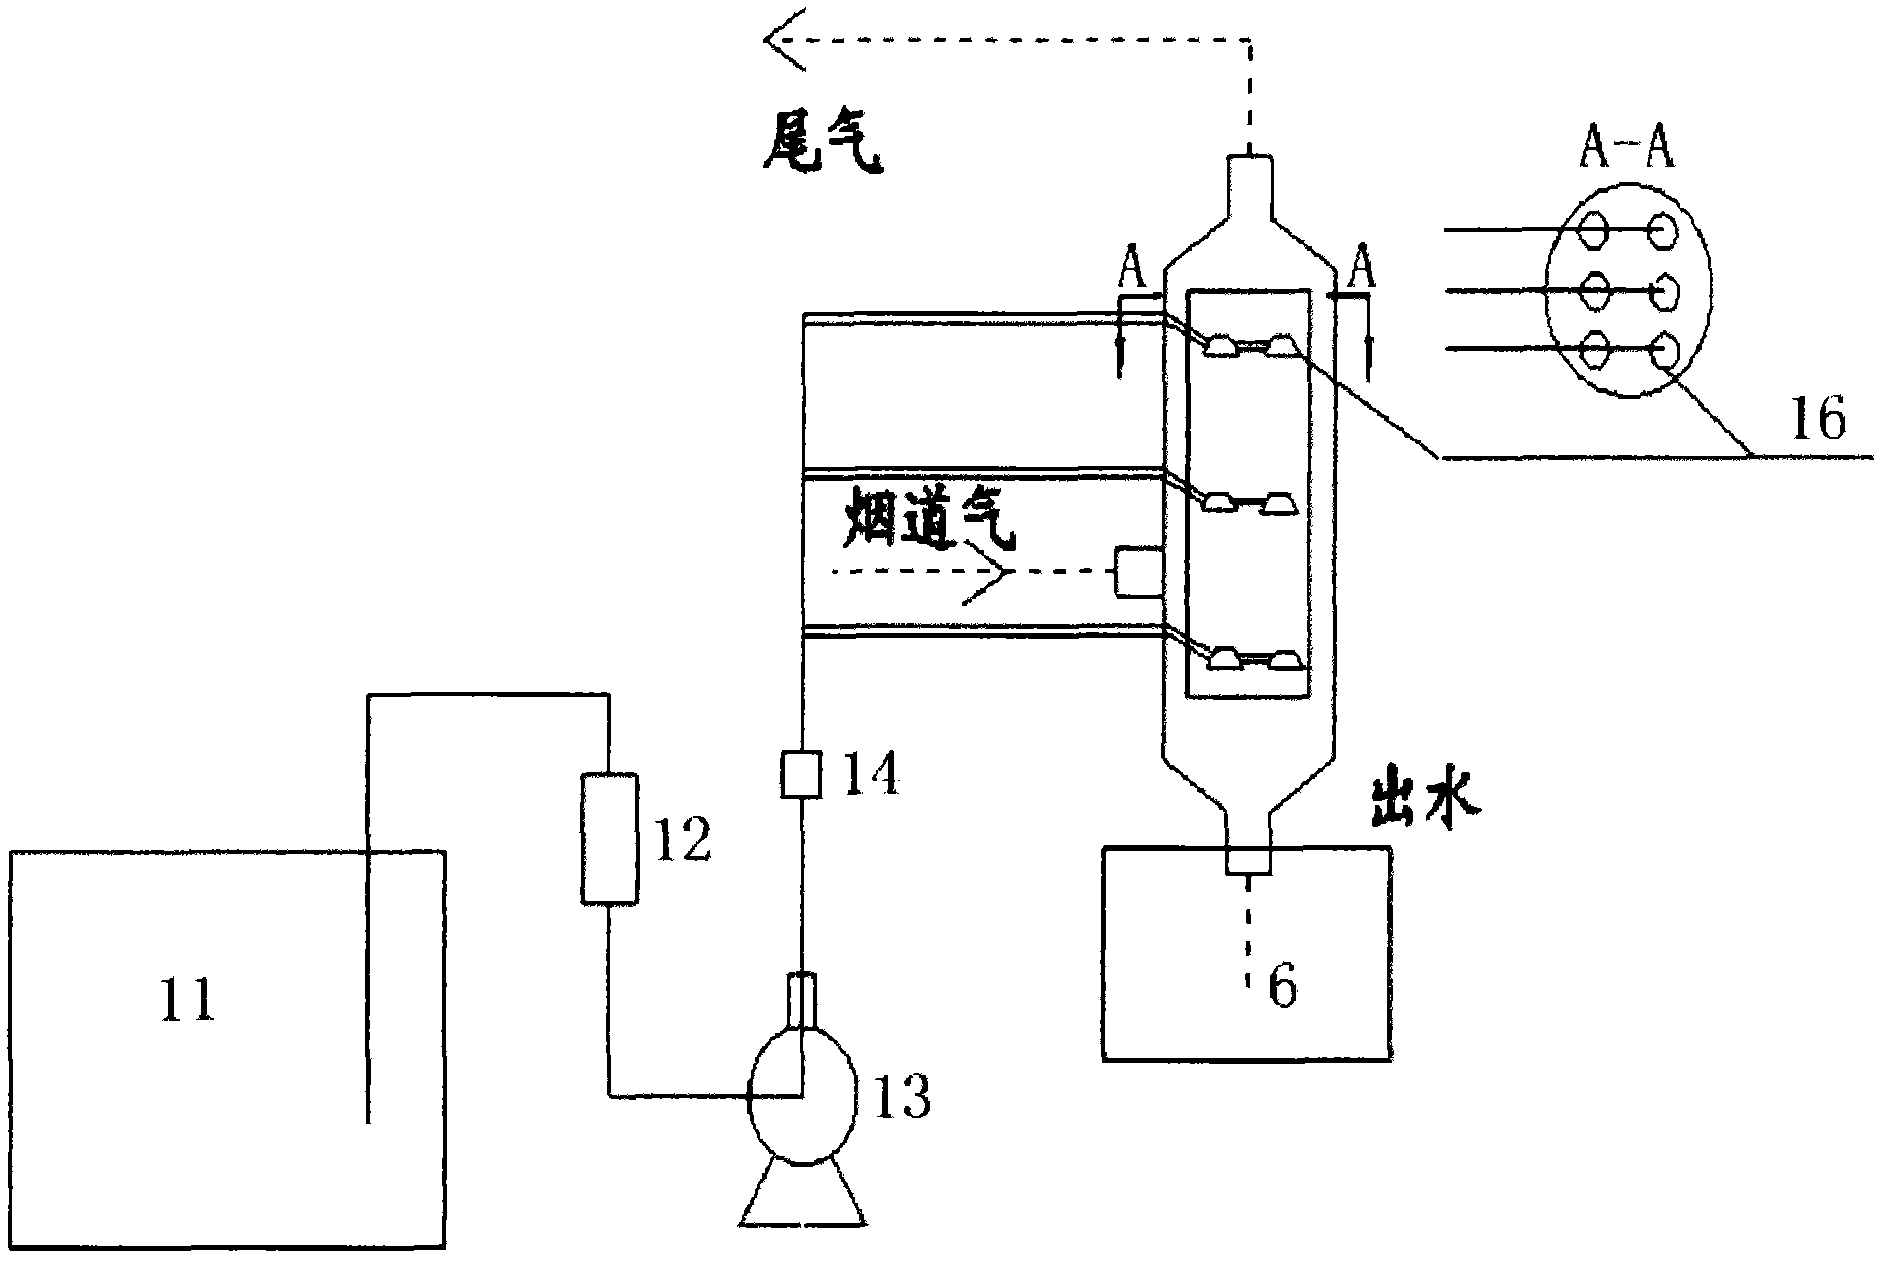 Method for controlling and treating alumina alkaline waste water from aluminum factory by using acidic smoker waste gas